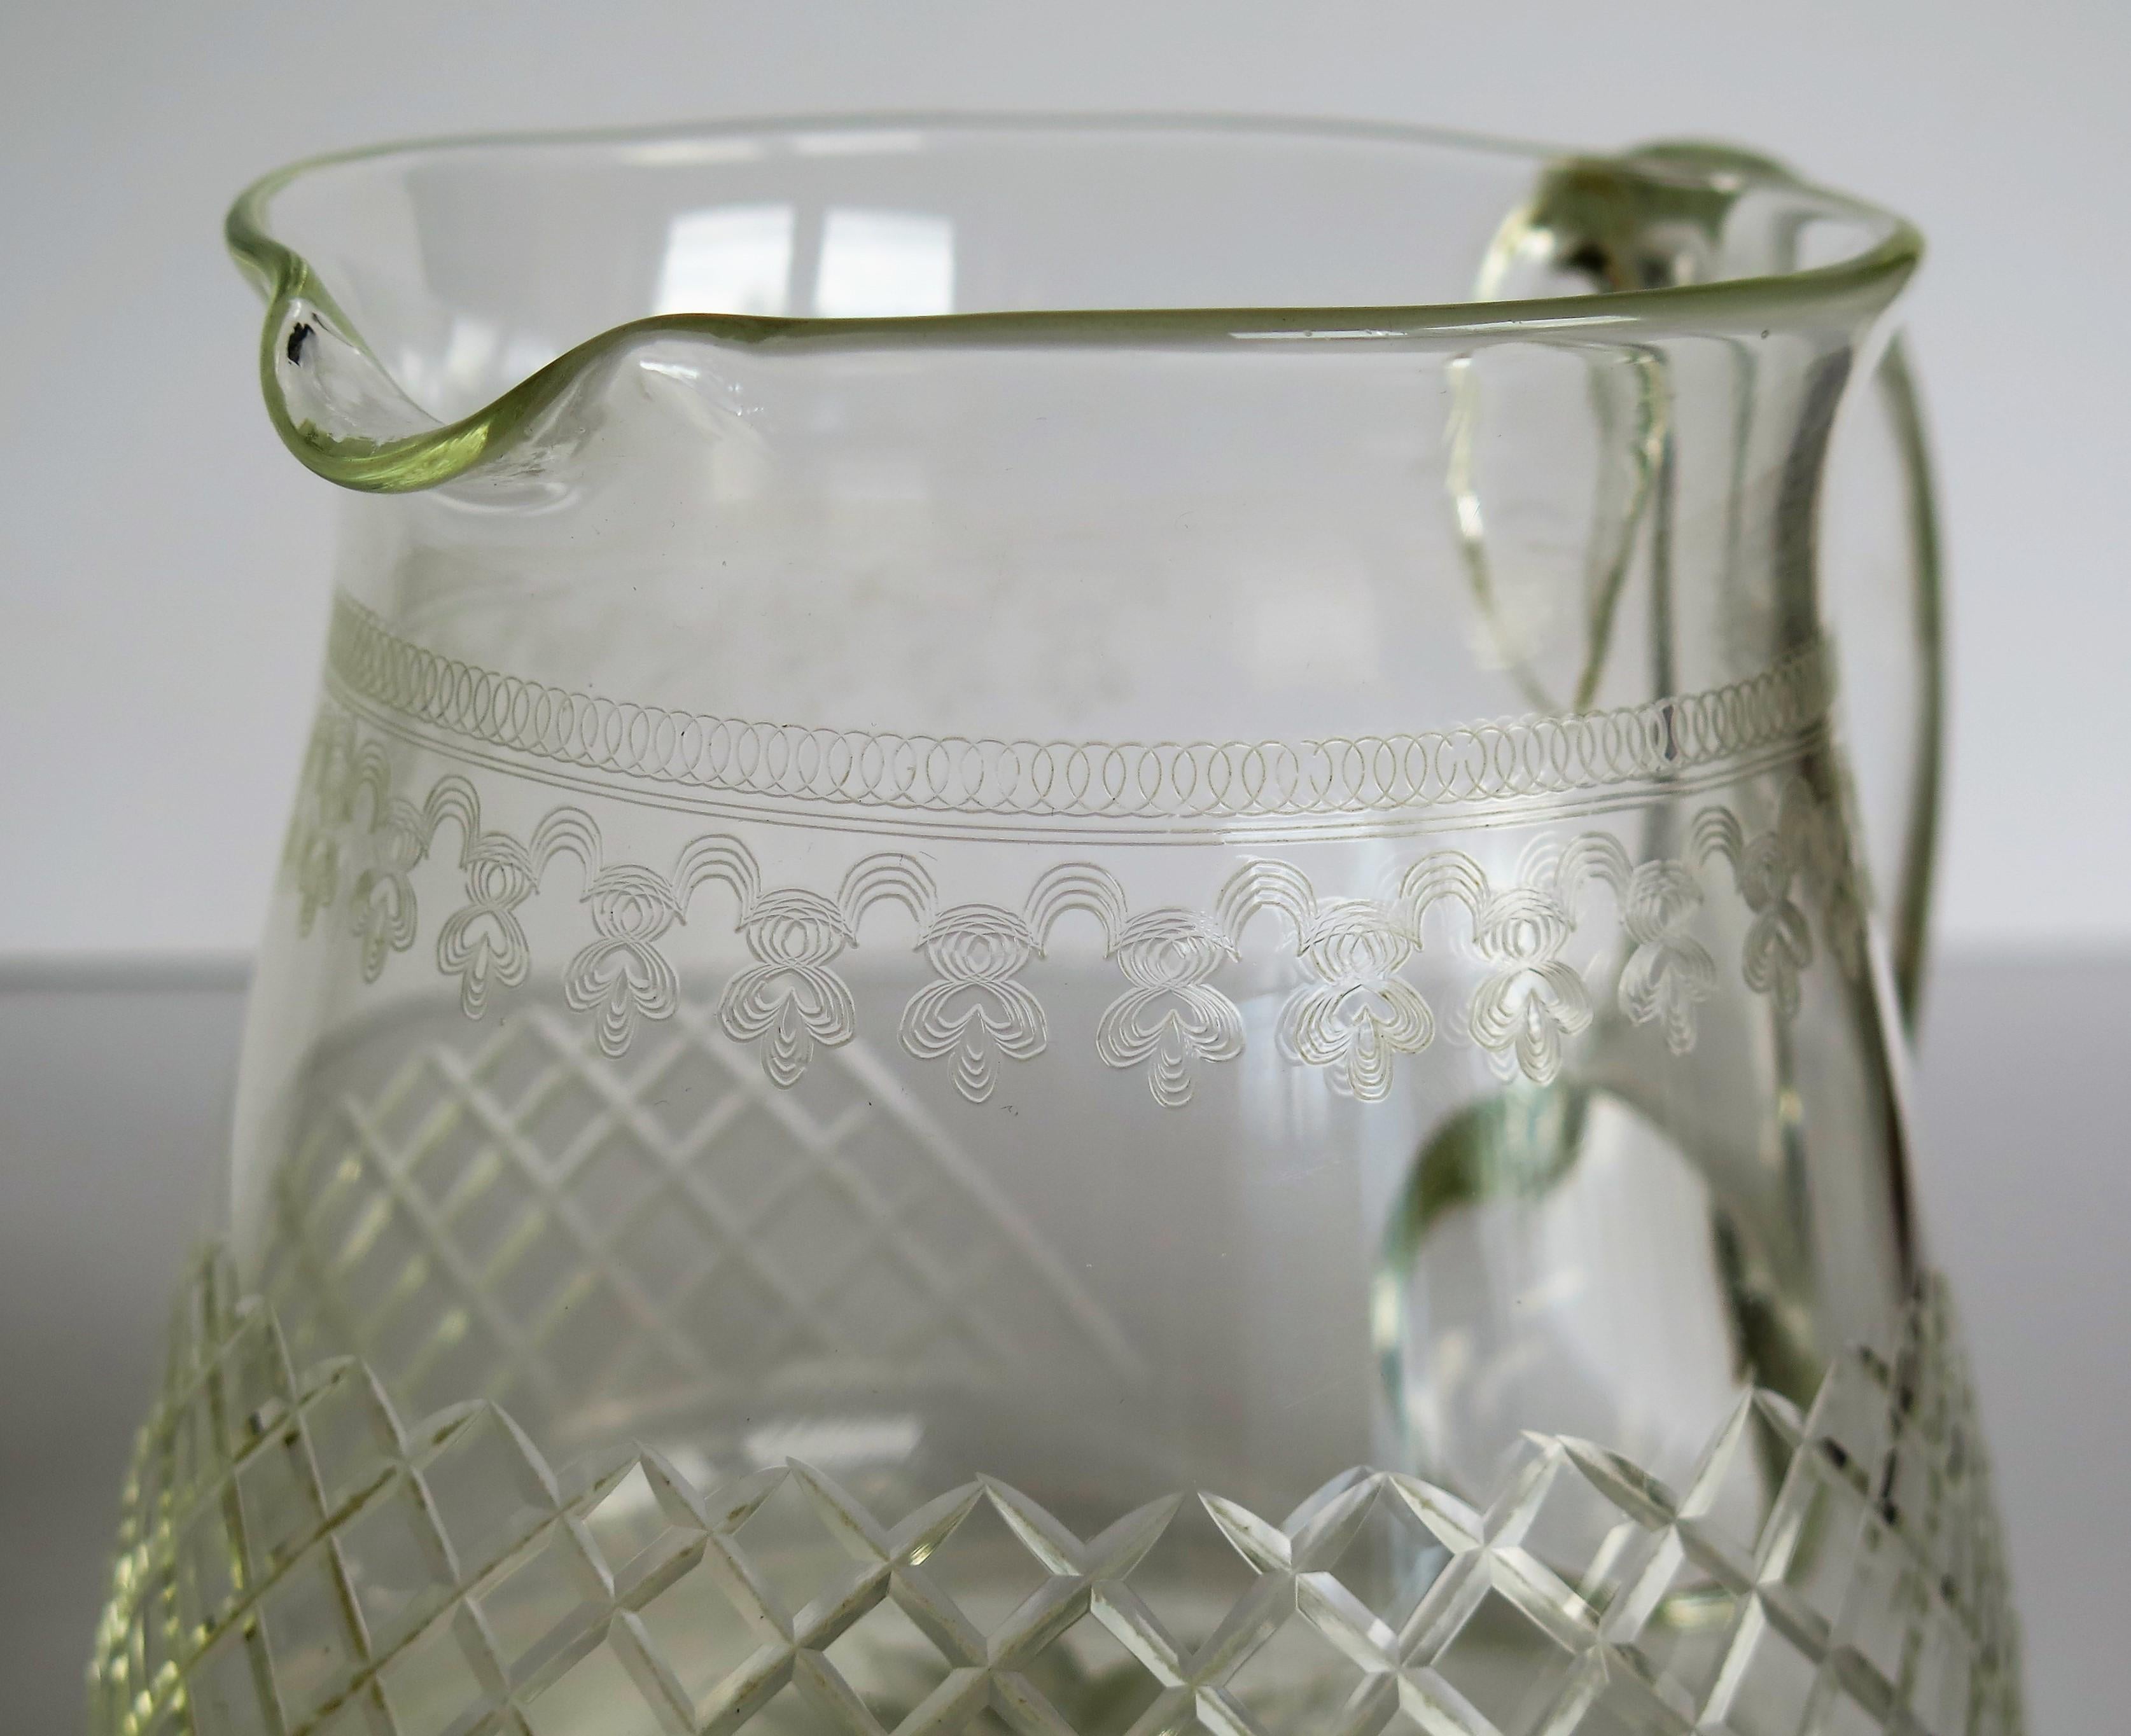 Edwardian Water Jug or Pitcher Crystal Lead Glass Cut and Engraved Holds 1.5 Pt 4